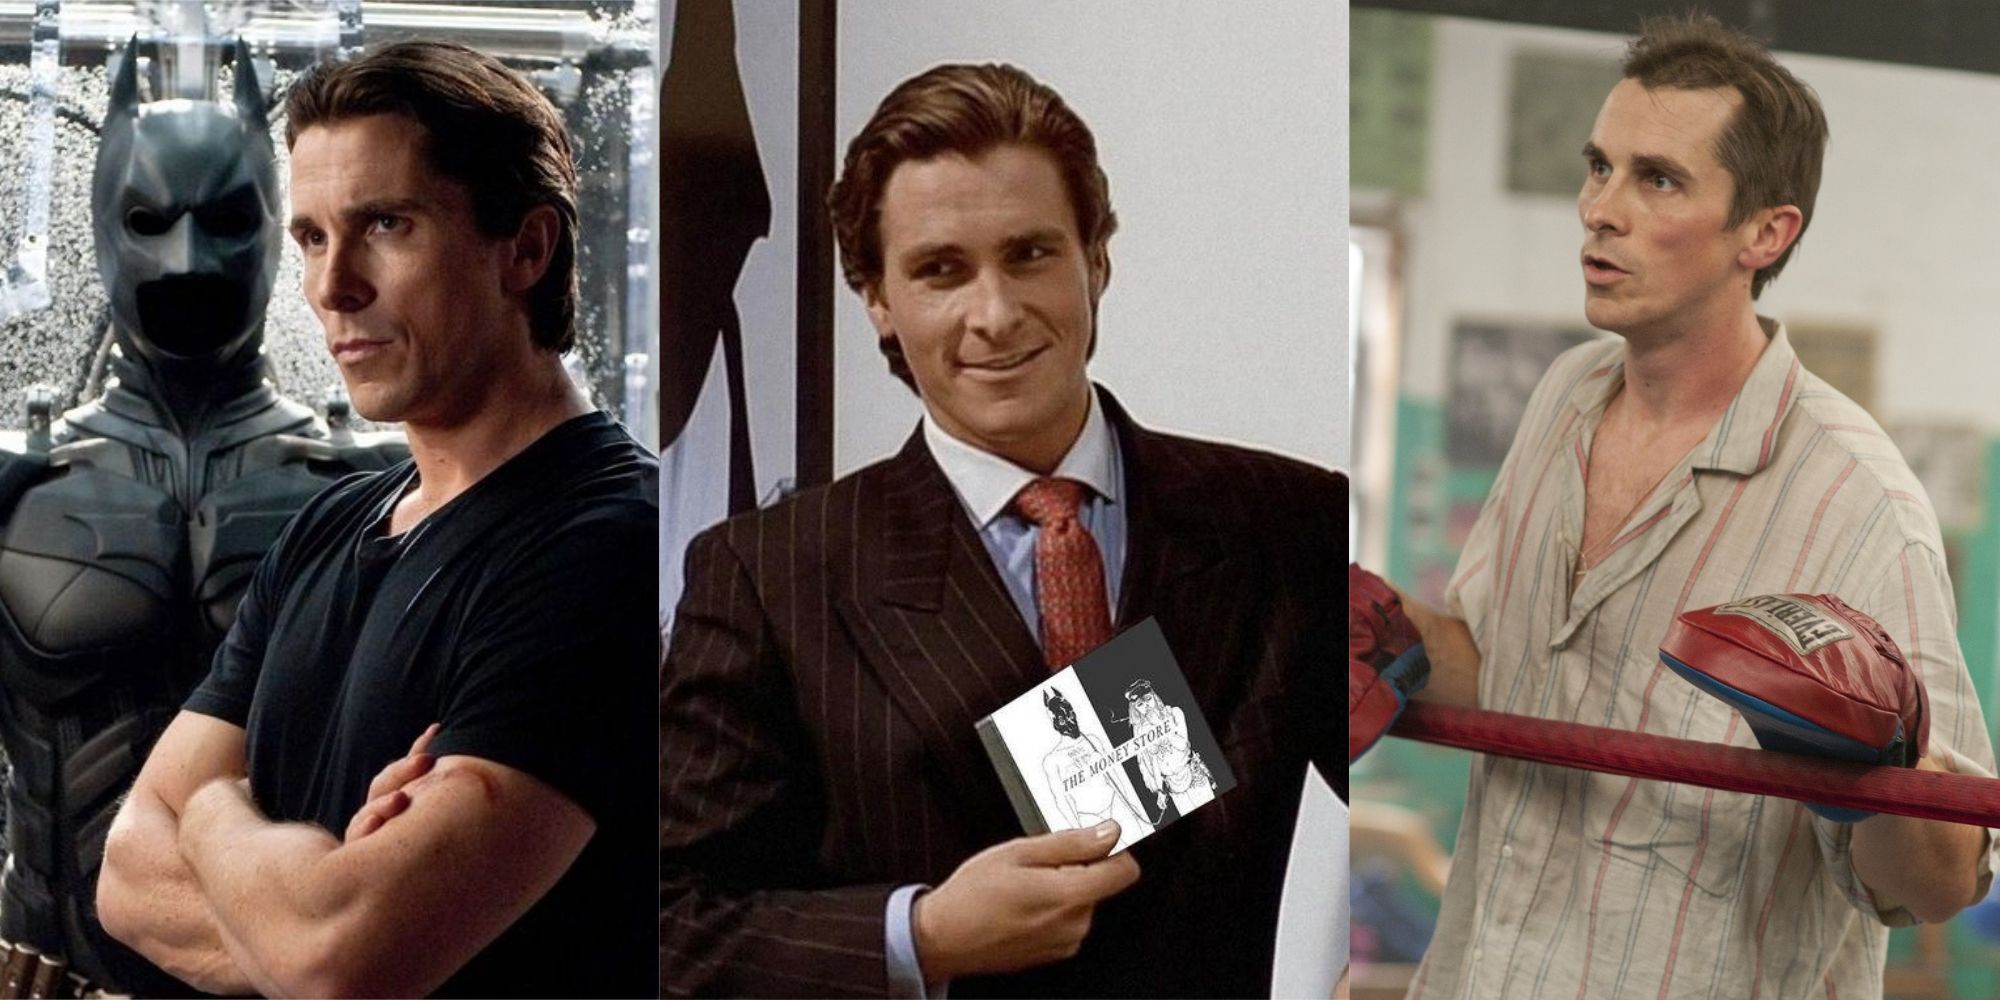 Christian Bale's 10 Best Movies, According To Letterboxd